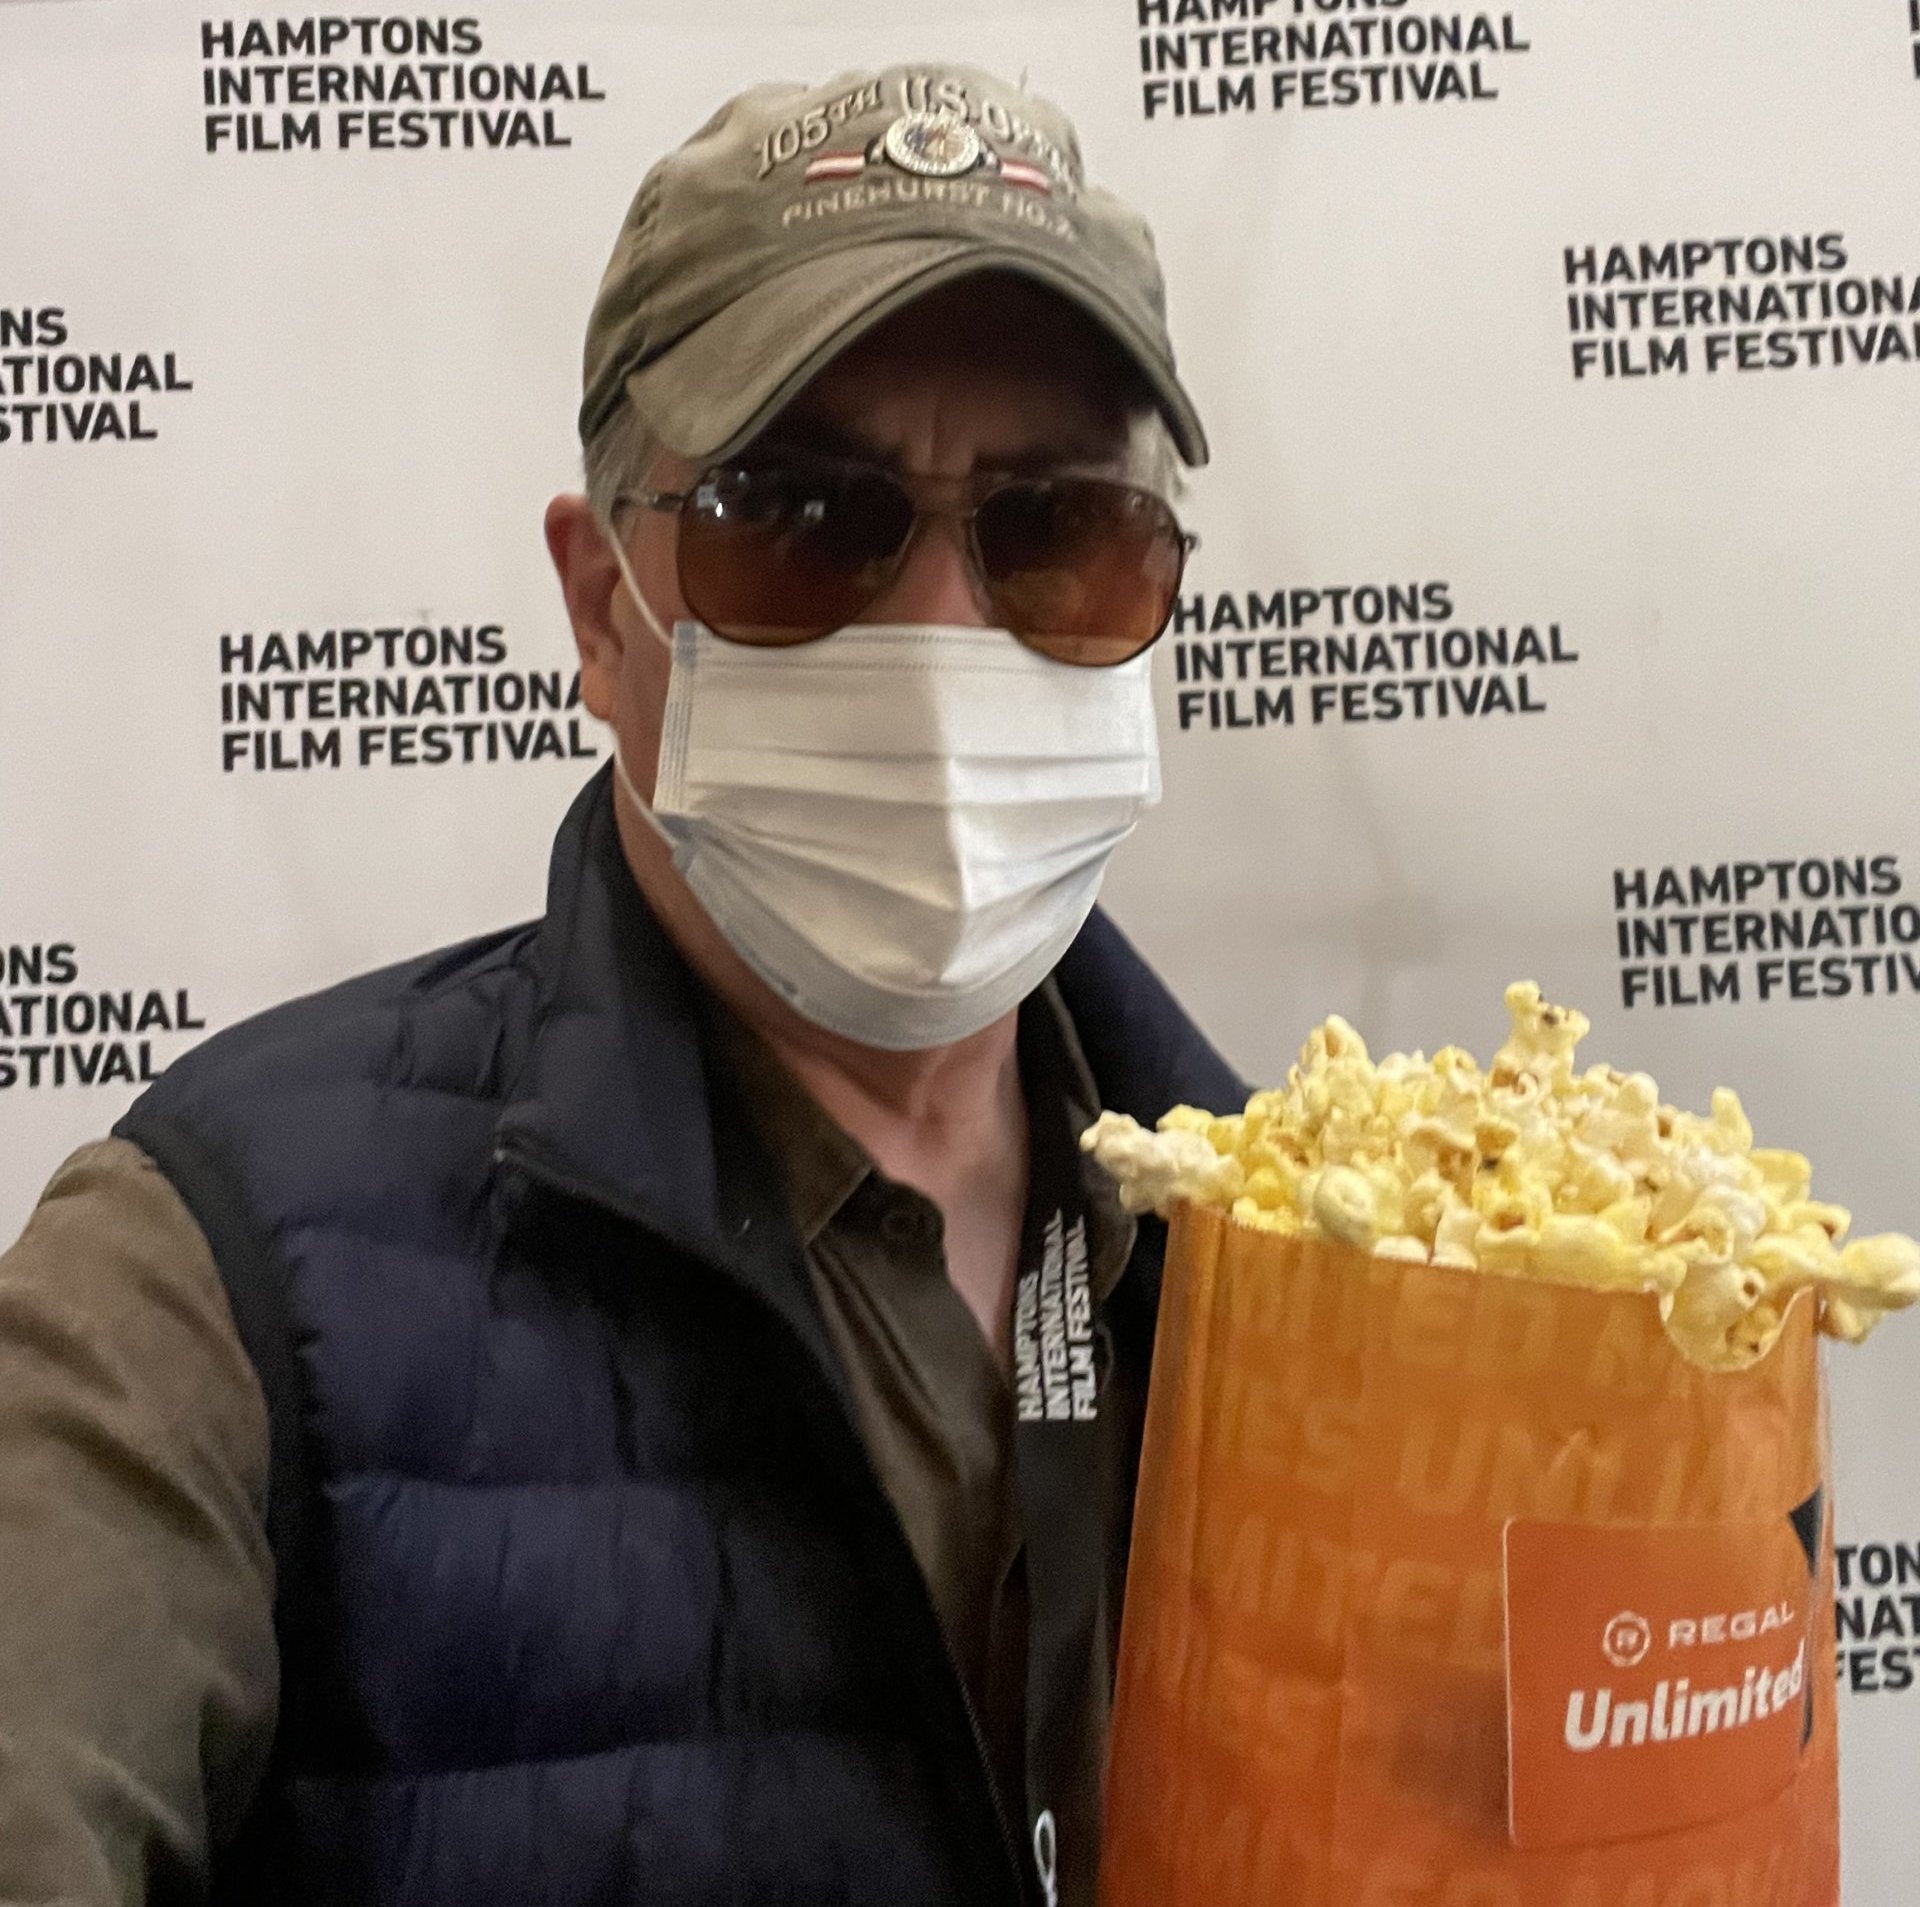 Bill McCuddy may find it challenging to eat his popcorn at this year's HIFF